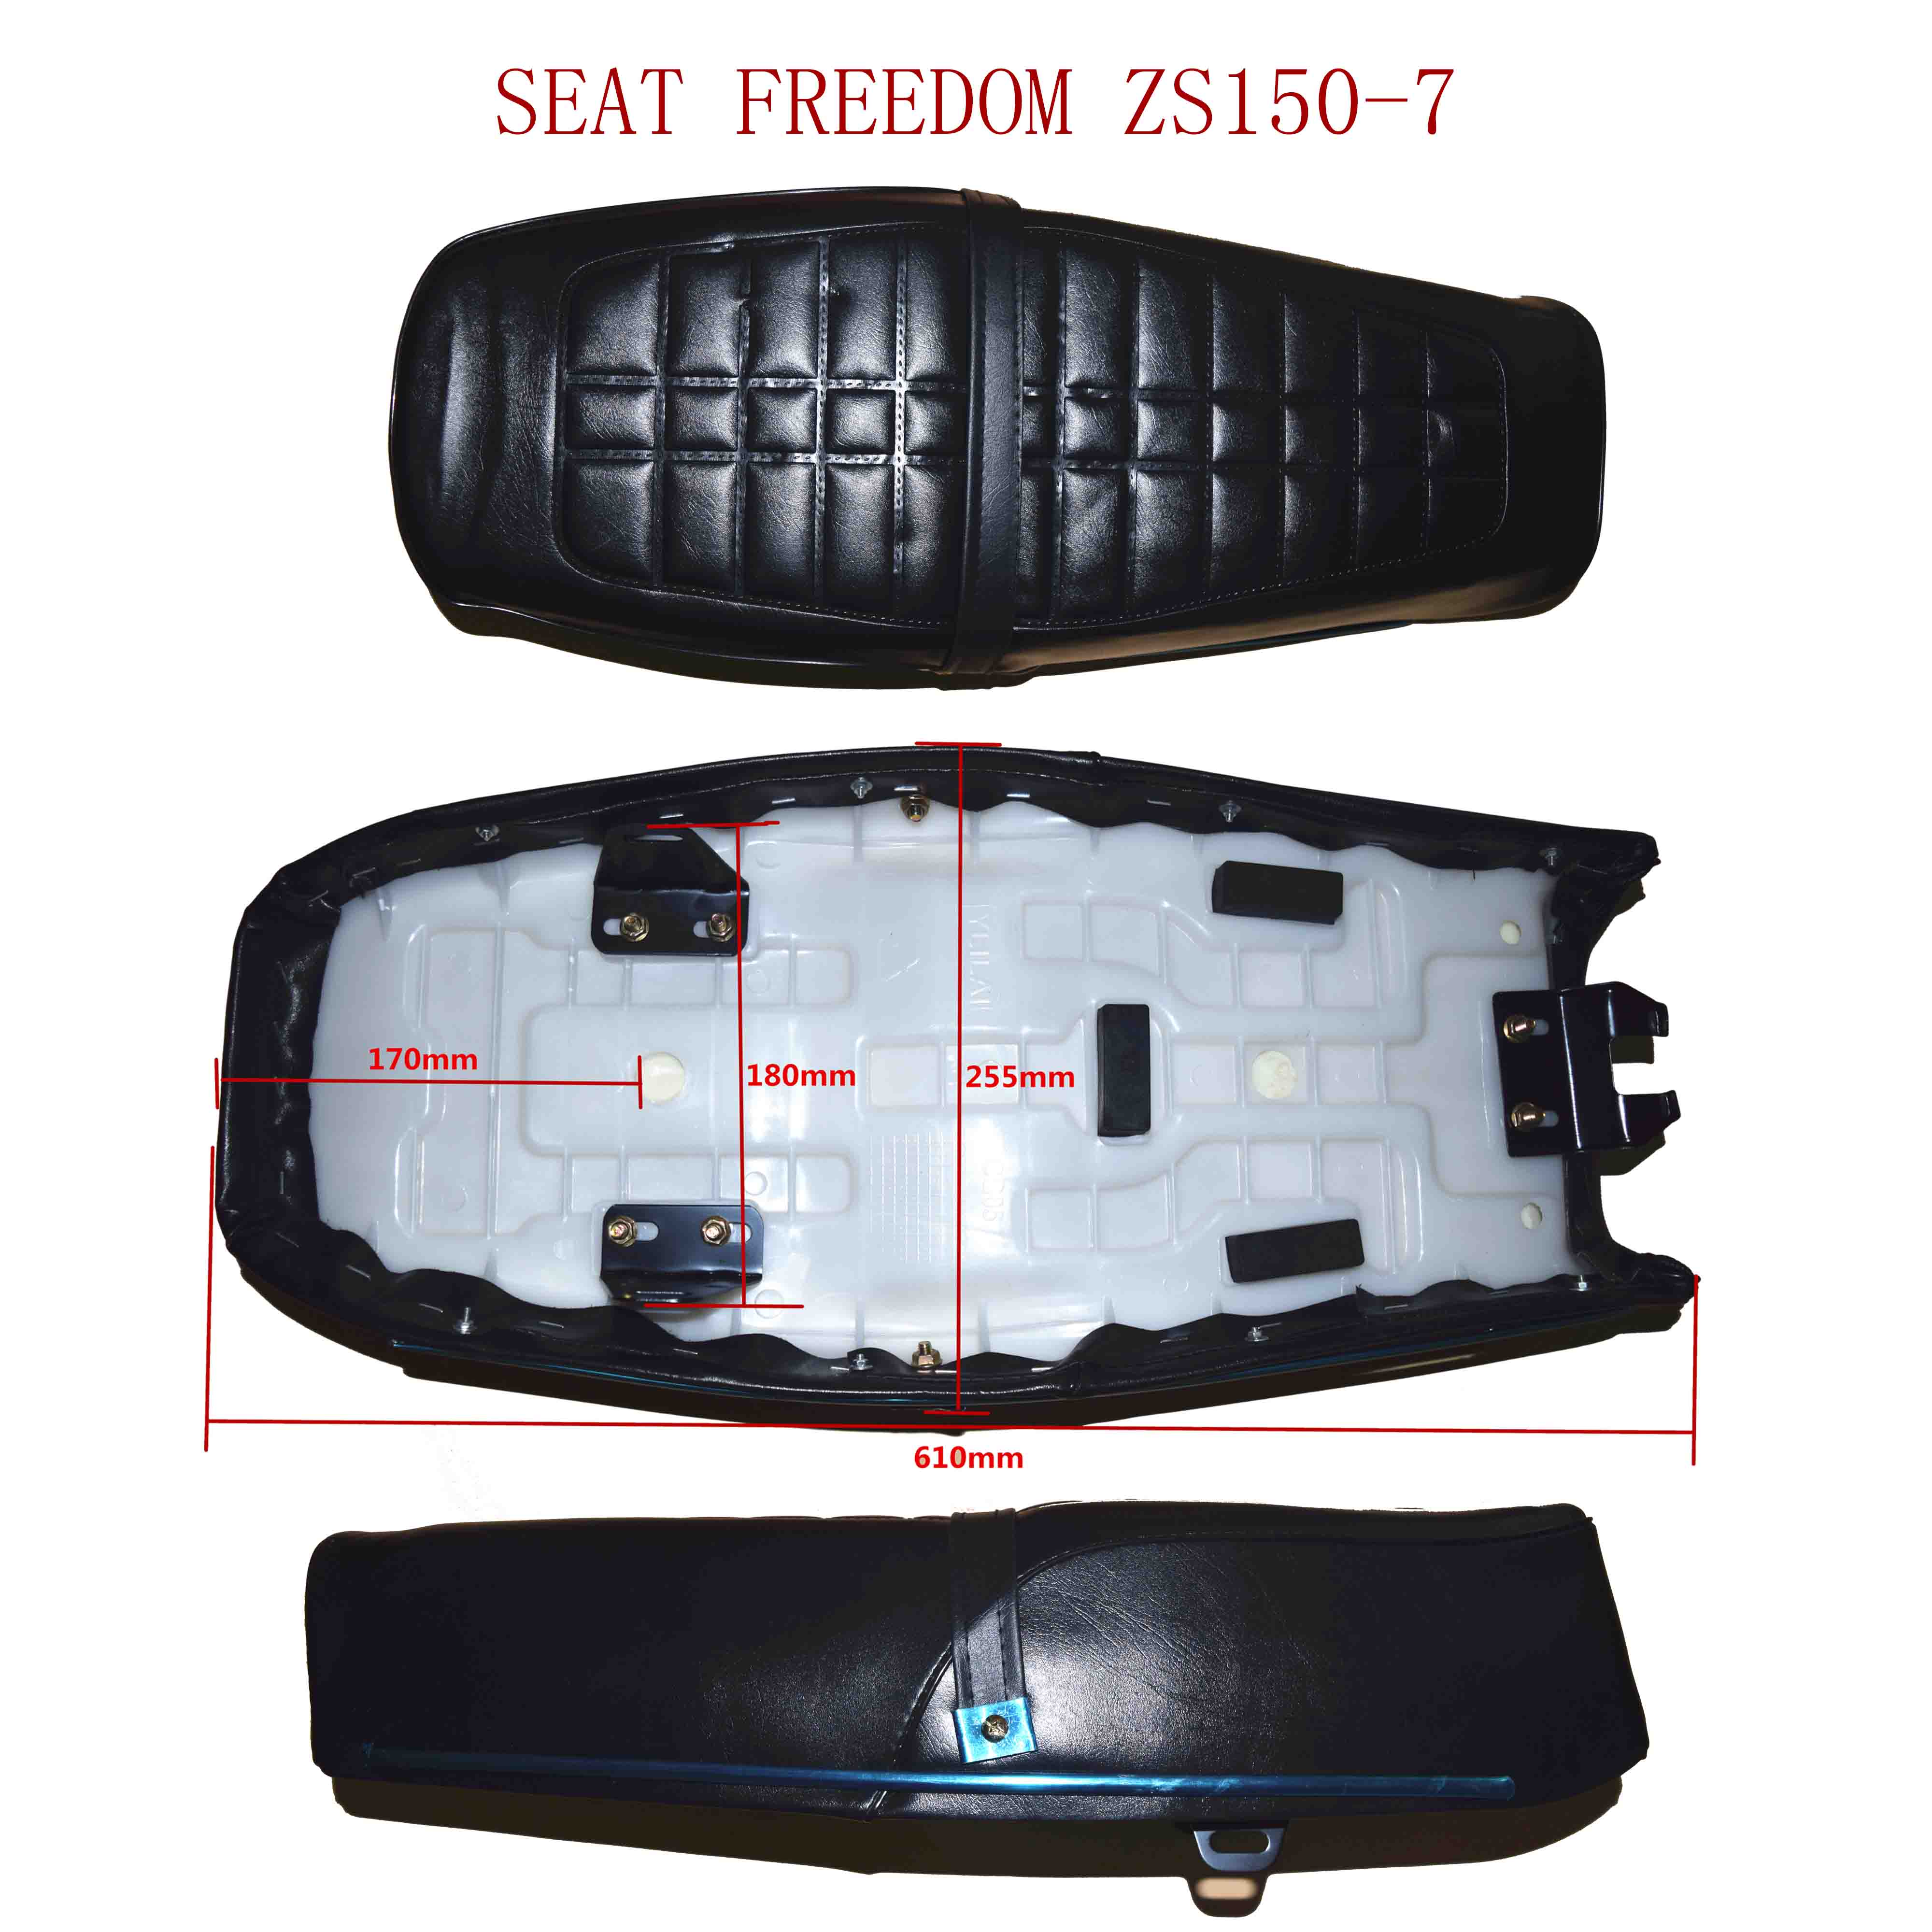 SEAT FREEDOM ZS150-7 